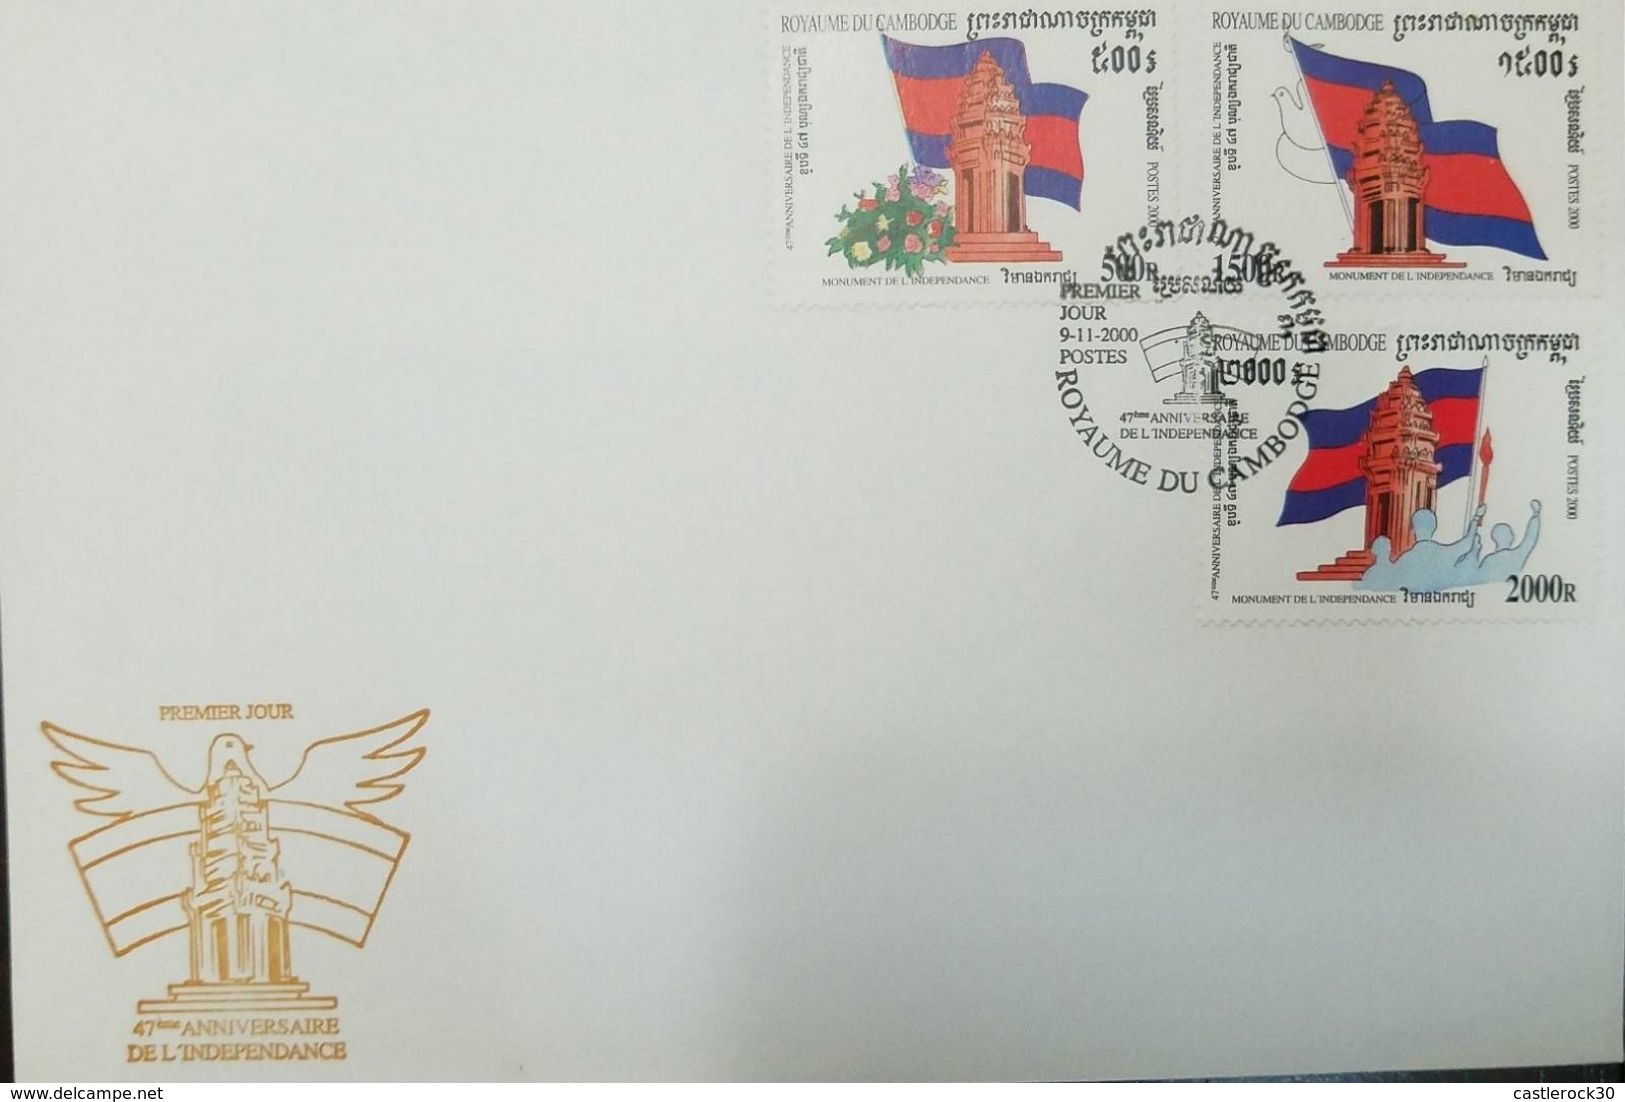 L) 2000 CAMBODIA, MONUMENT OF INDEPENDENCE, 47 ANNIVERSARY, ARCHITECTURE, FLAG, FLOWERS, PEOPLE, FDC - Cambodia